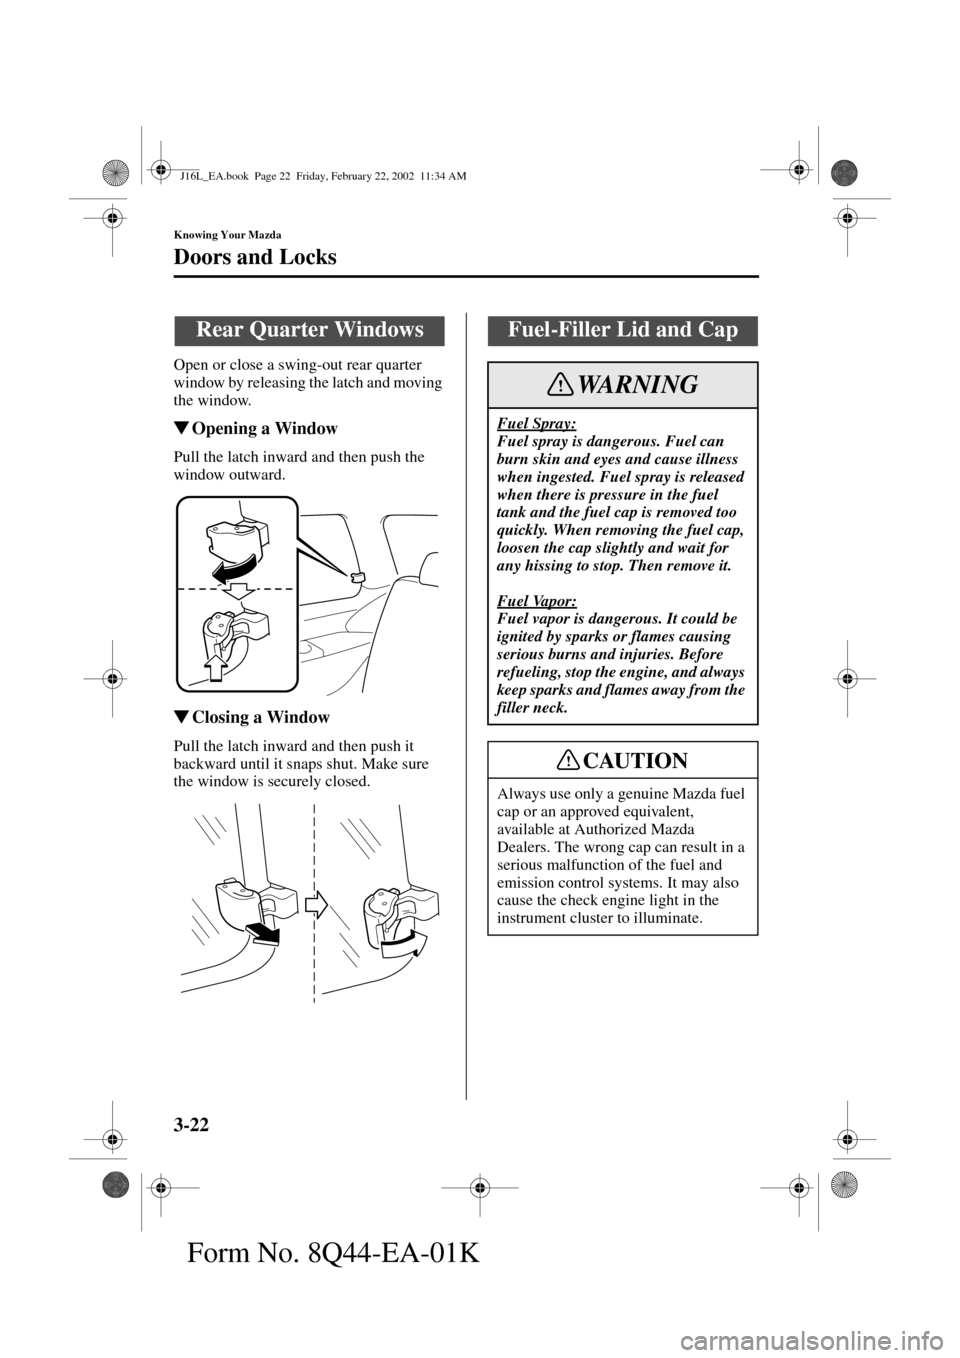 MAZDA MODEL MPV 2002  Owners Manual (in English) 3-22
Knowing Your Mazda
Doors and Locks
Form No. 8Q44-EA-01K
Open or close a swing-out rear quarter 
window by releasing the latch and moving 
the window.
Opening a Window
Pull the latch inward and t